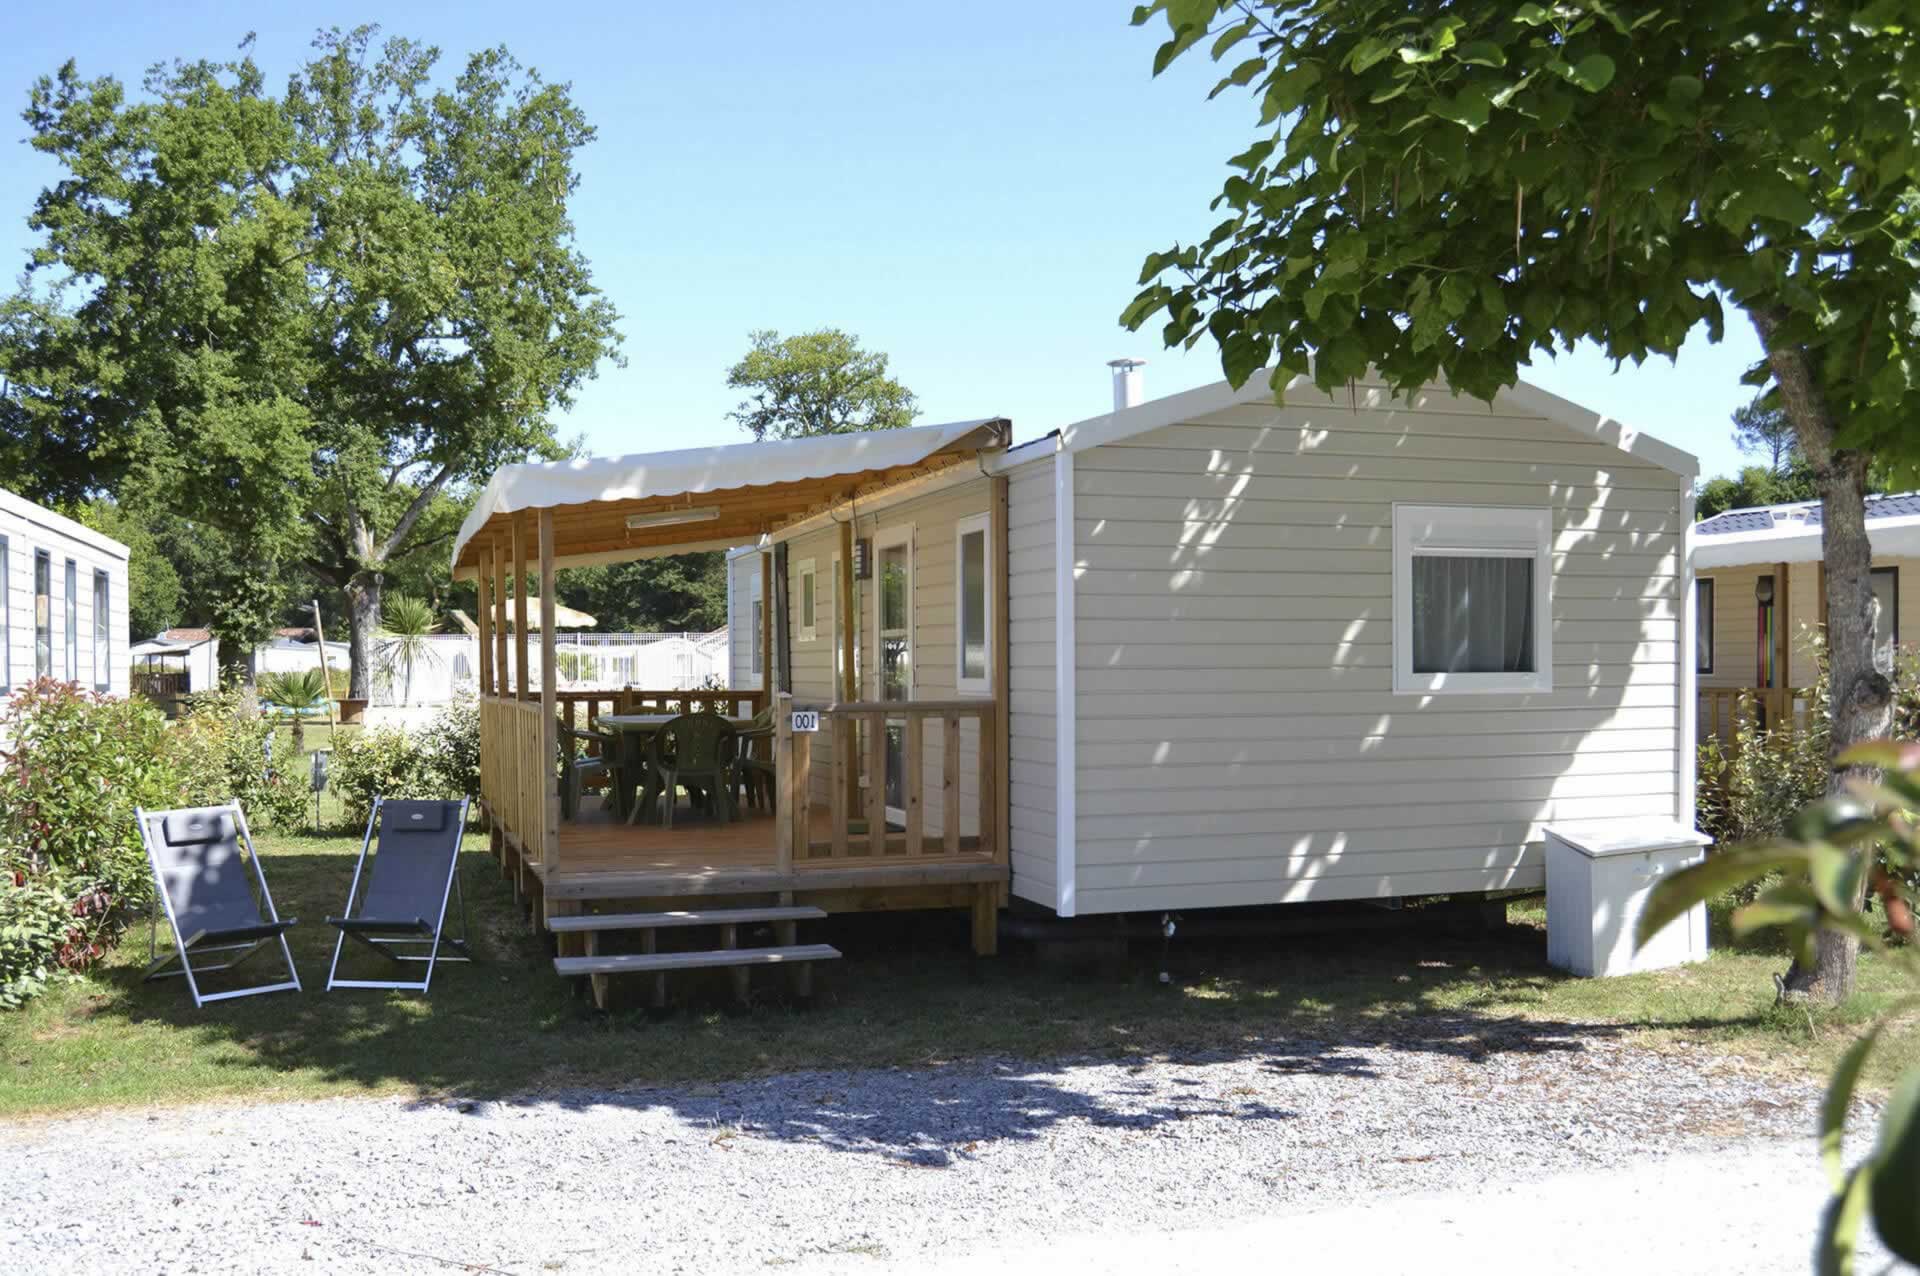 Spacious and fully equipped mobile homes